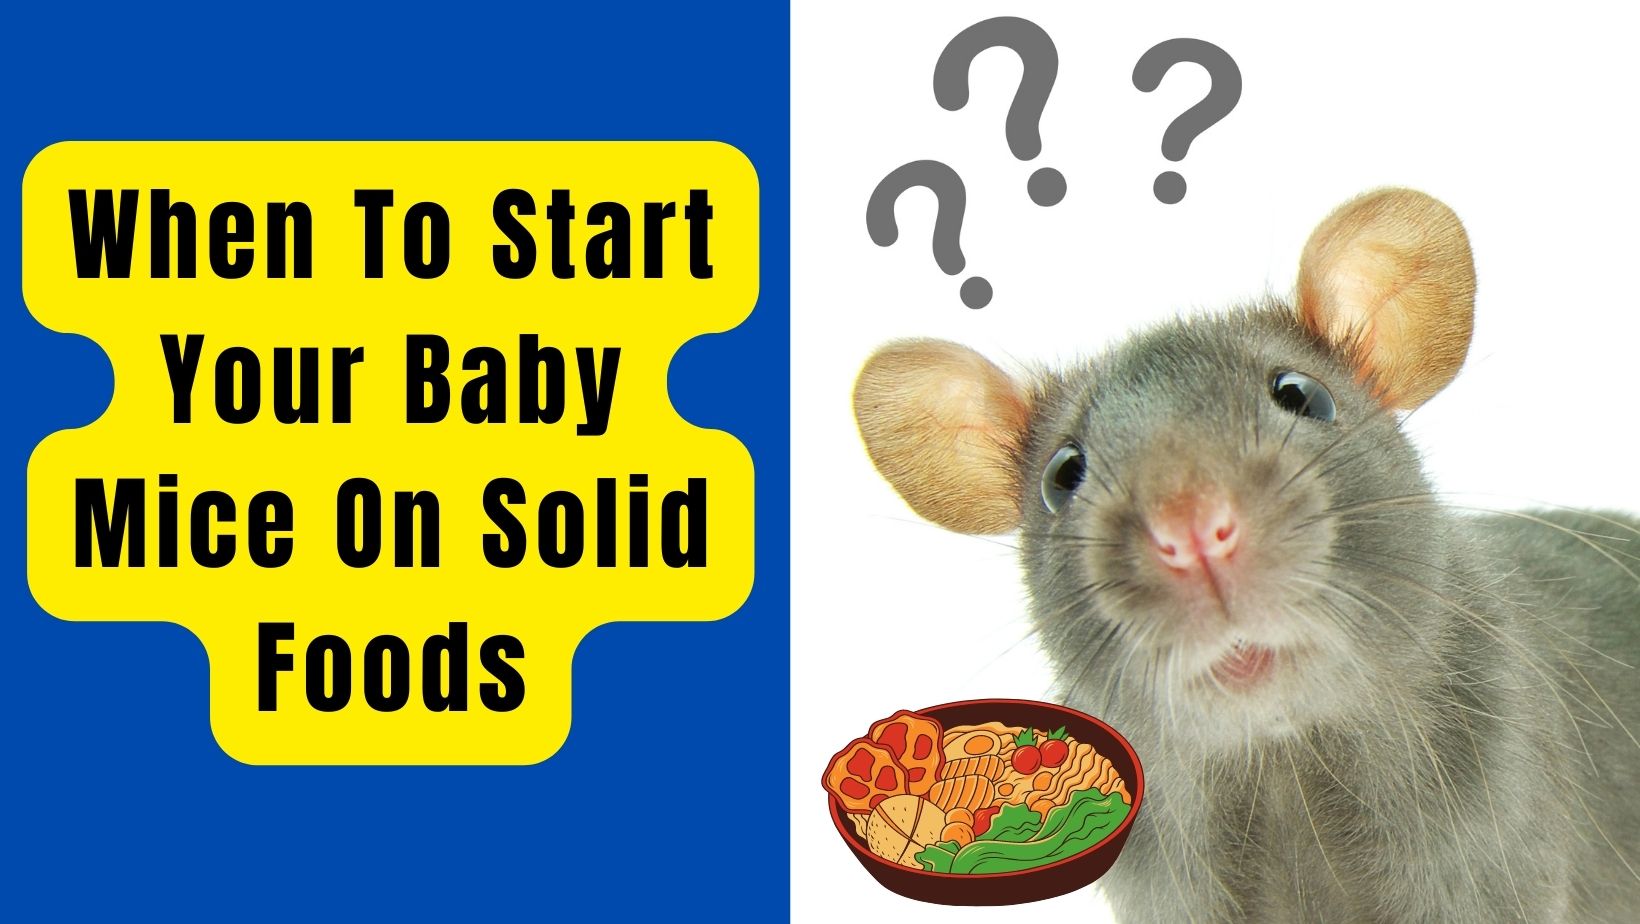 When To Start Your Baby Mice On Solid Foods?